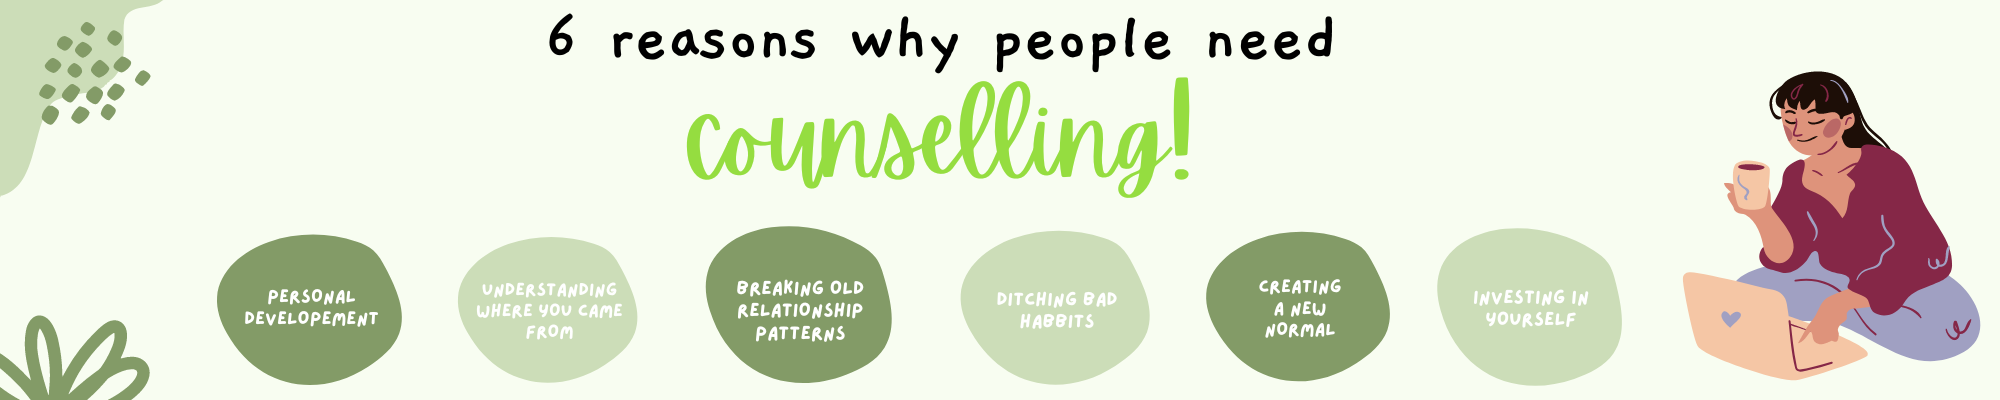 6 reasons why people need counselling!